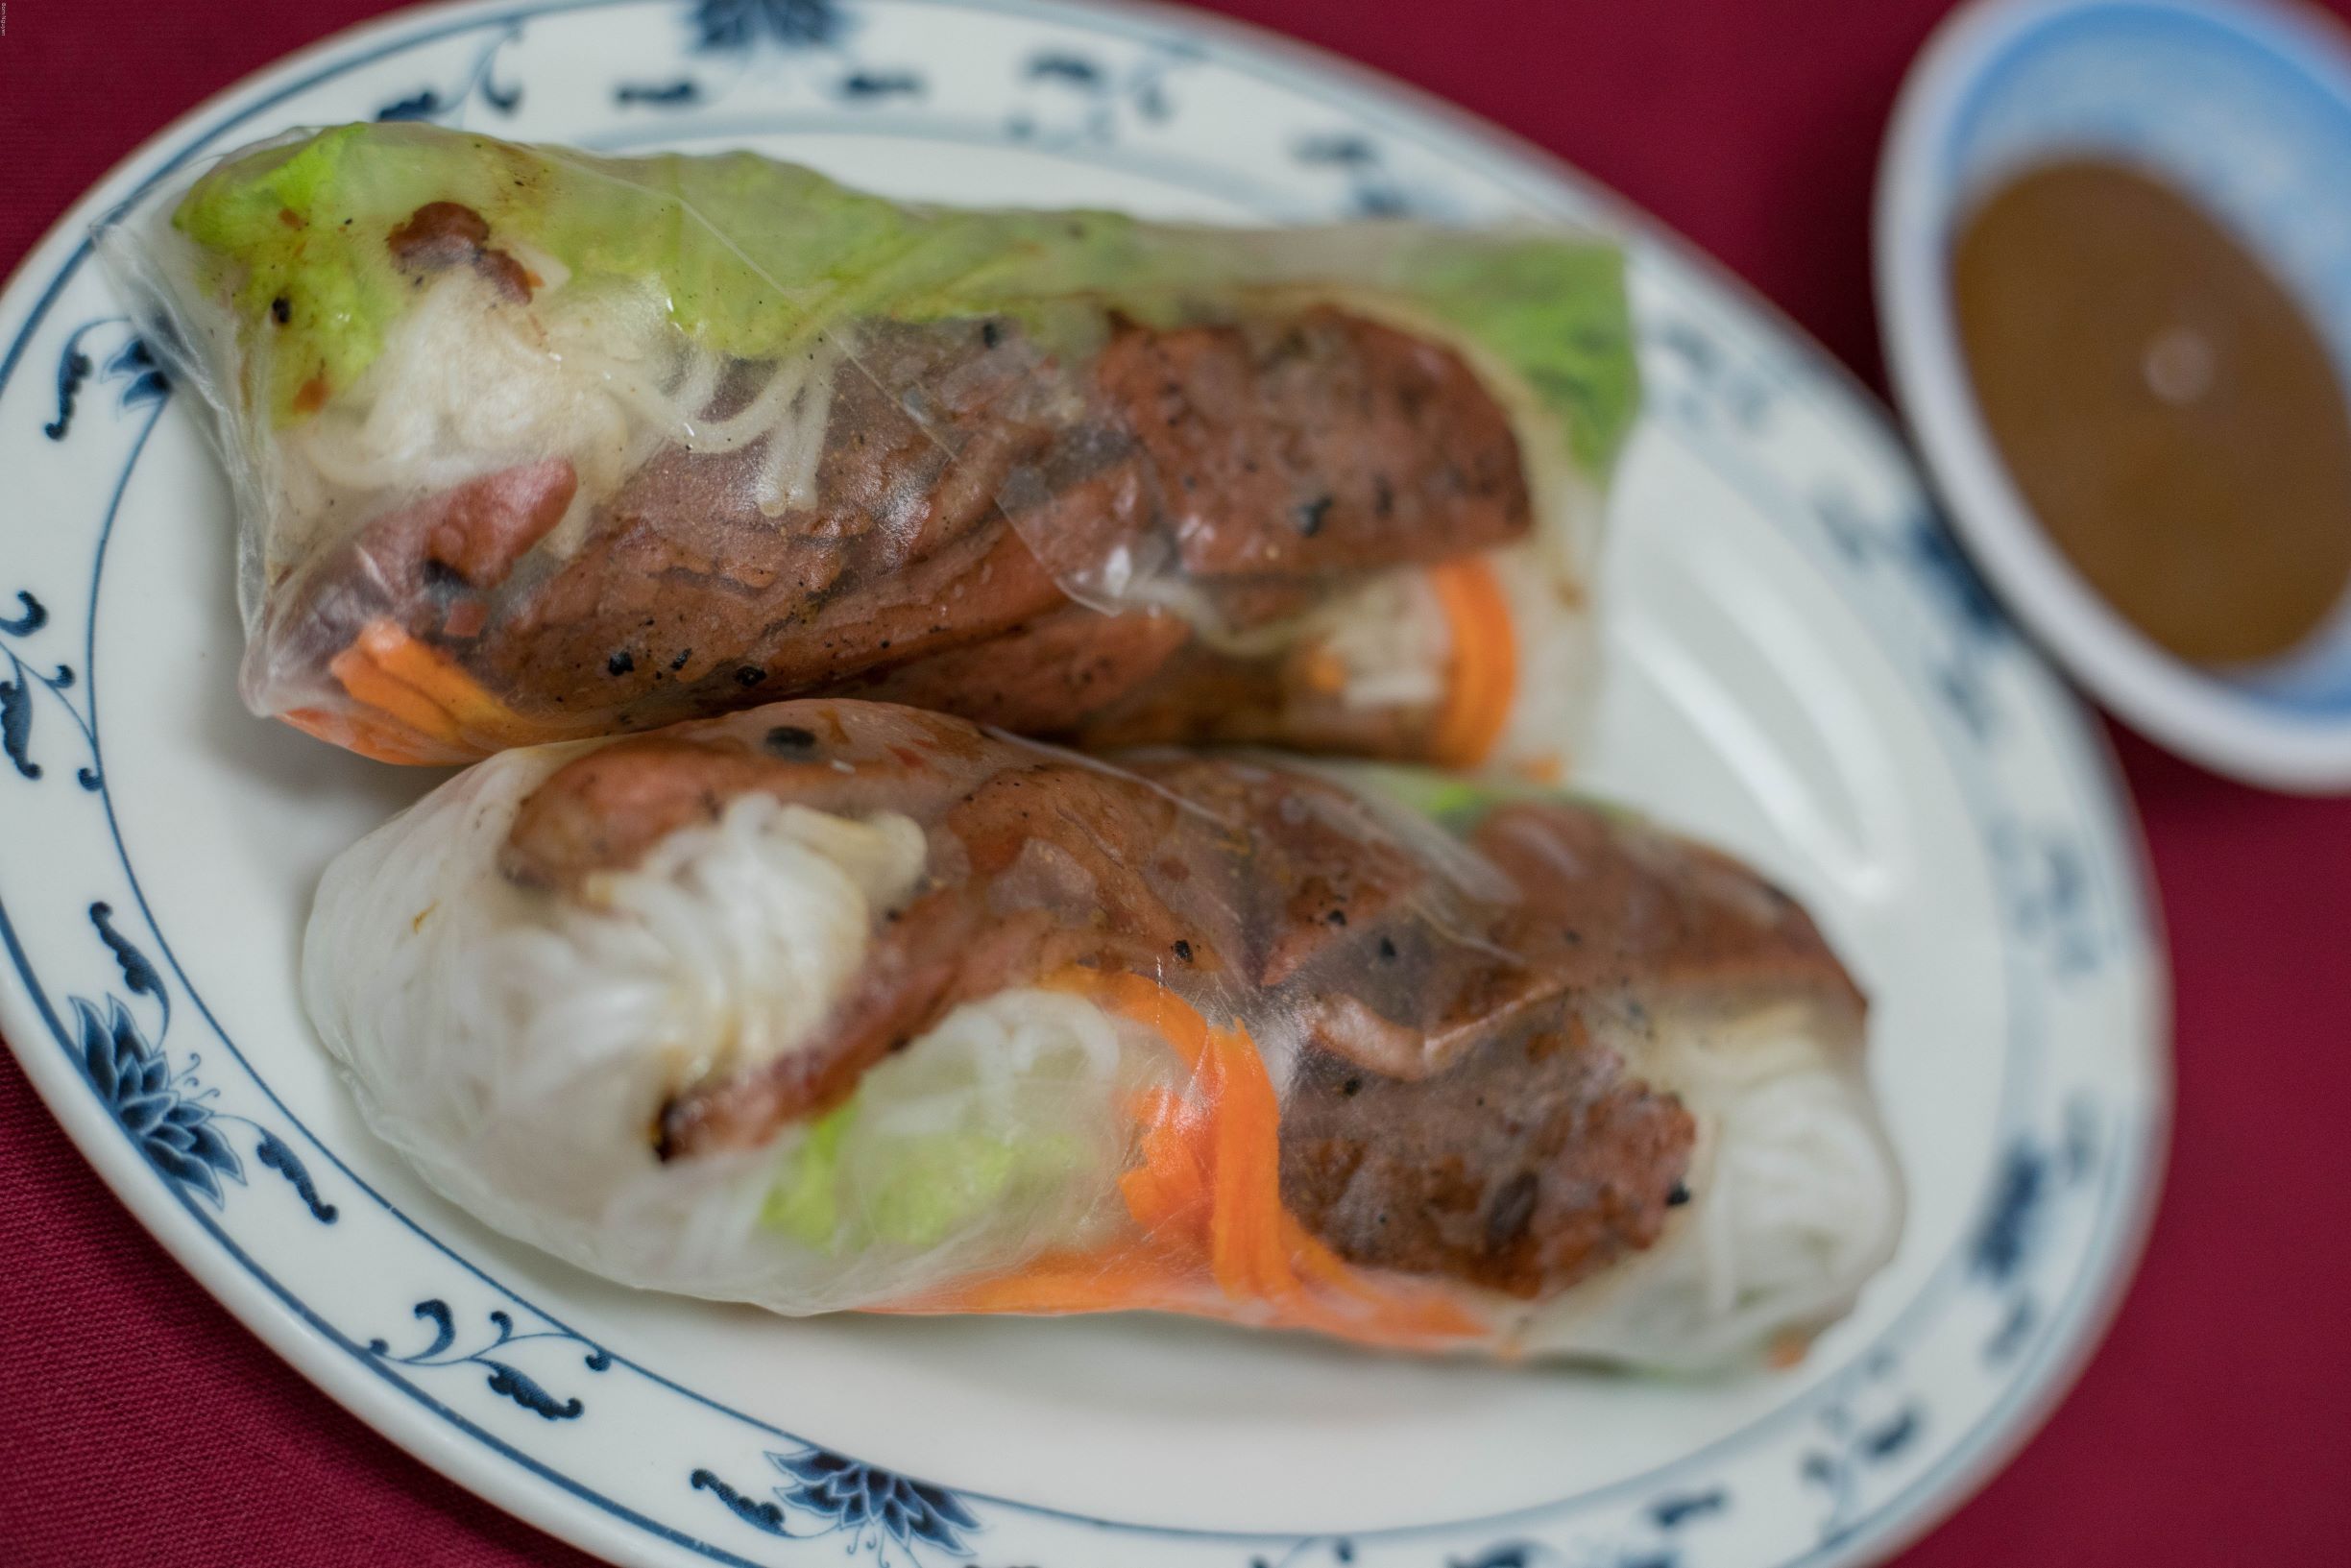 4A.   GOI CUON THIT NUONG*  (2 rolls)  